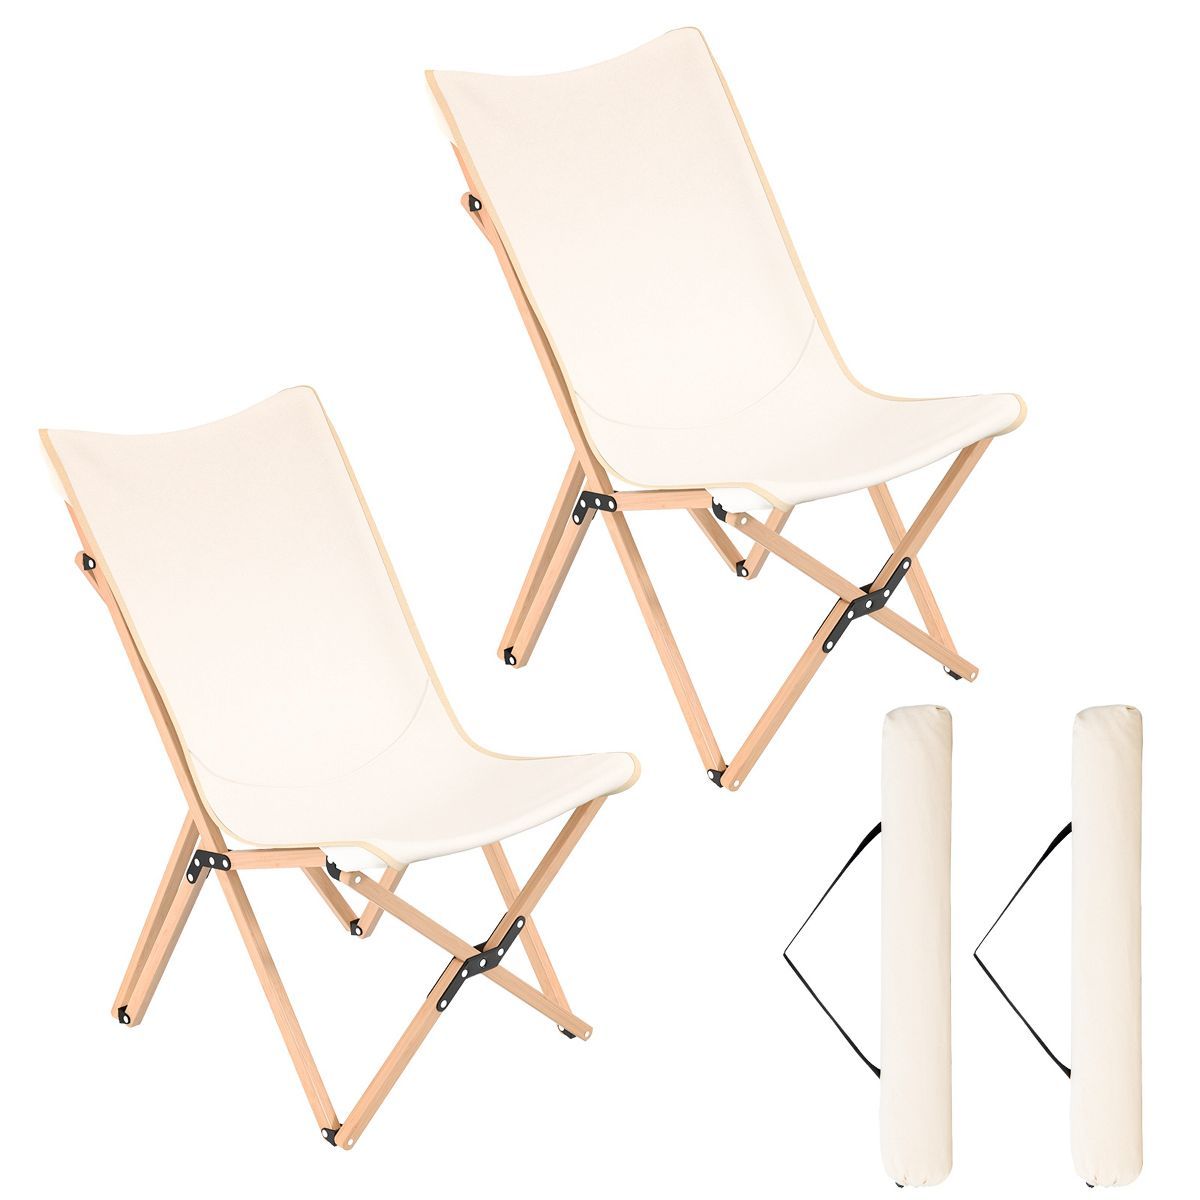 Costway Bamboo Butterfly Folding Chair Set of 2 with Storage Pocket 330 LBS Capacity | Target